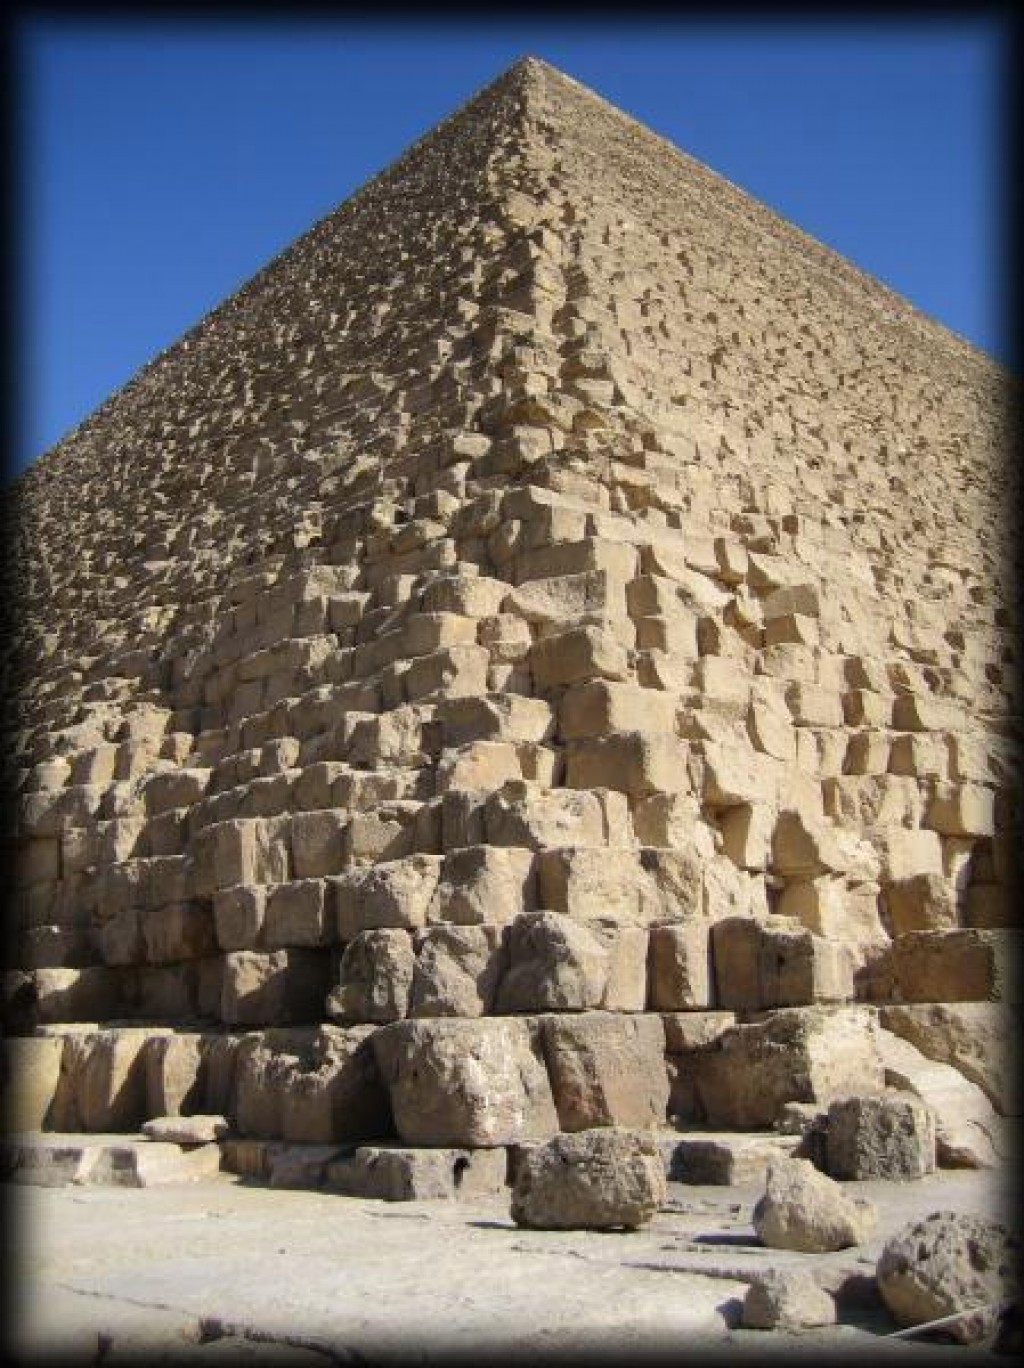 We visited the Pyramids of Giza outside of Cairo.  